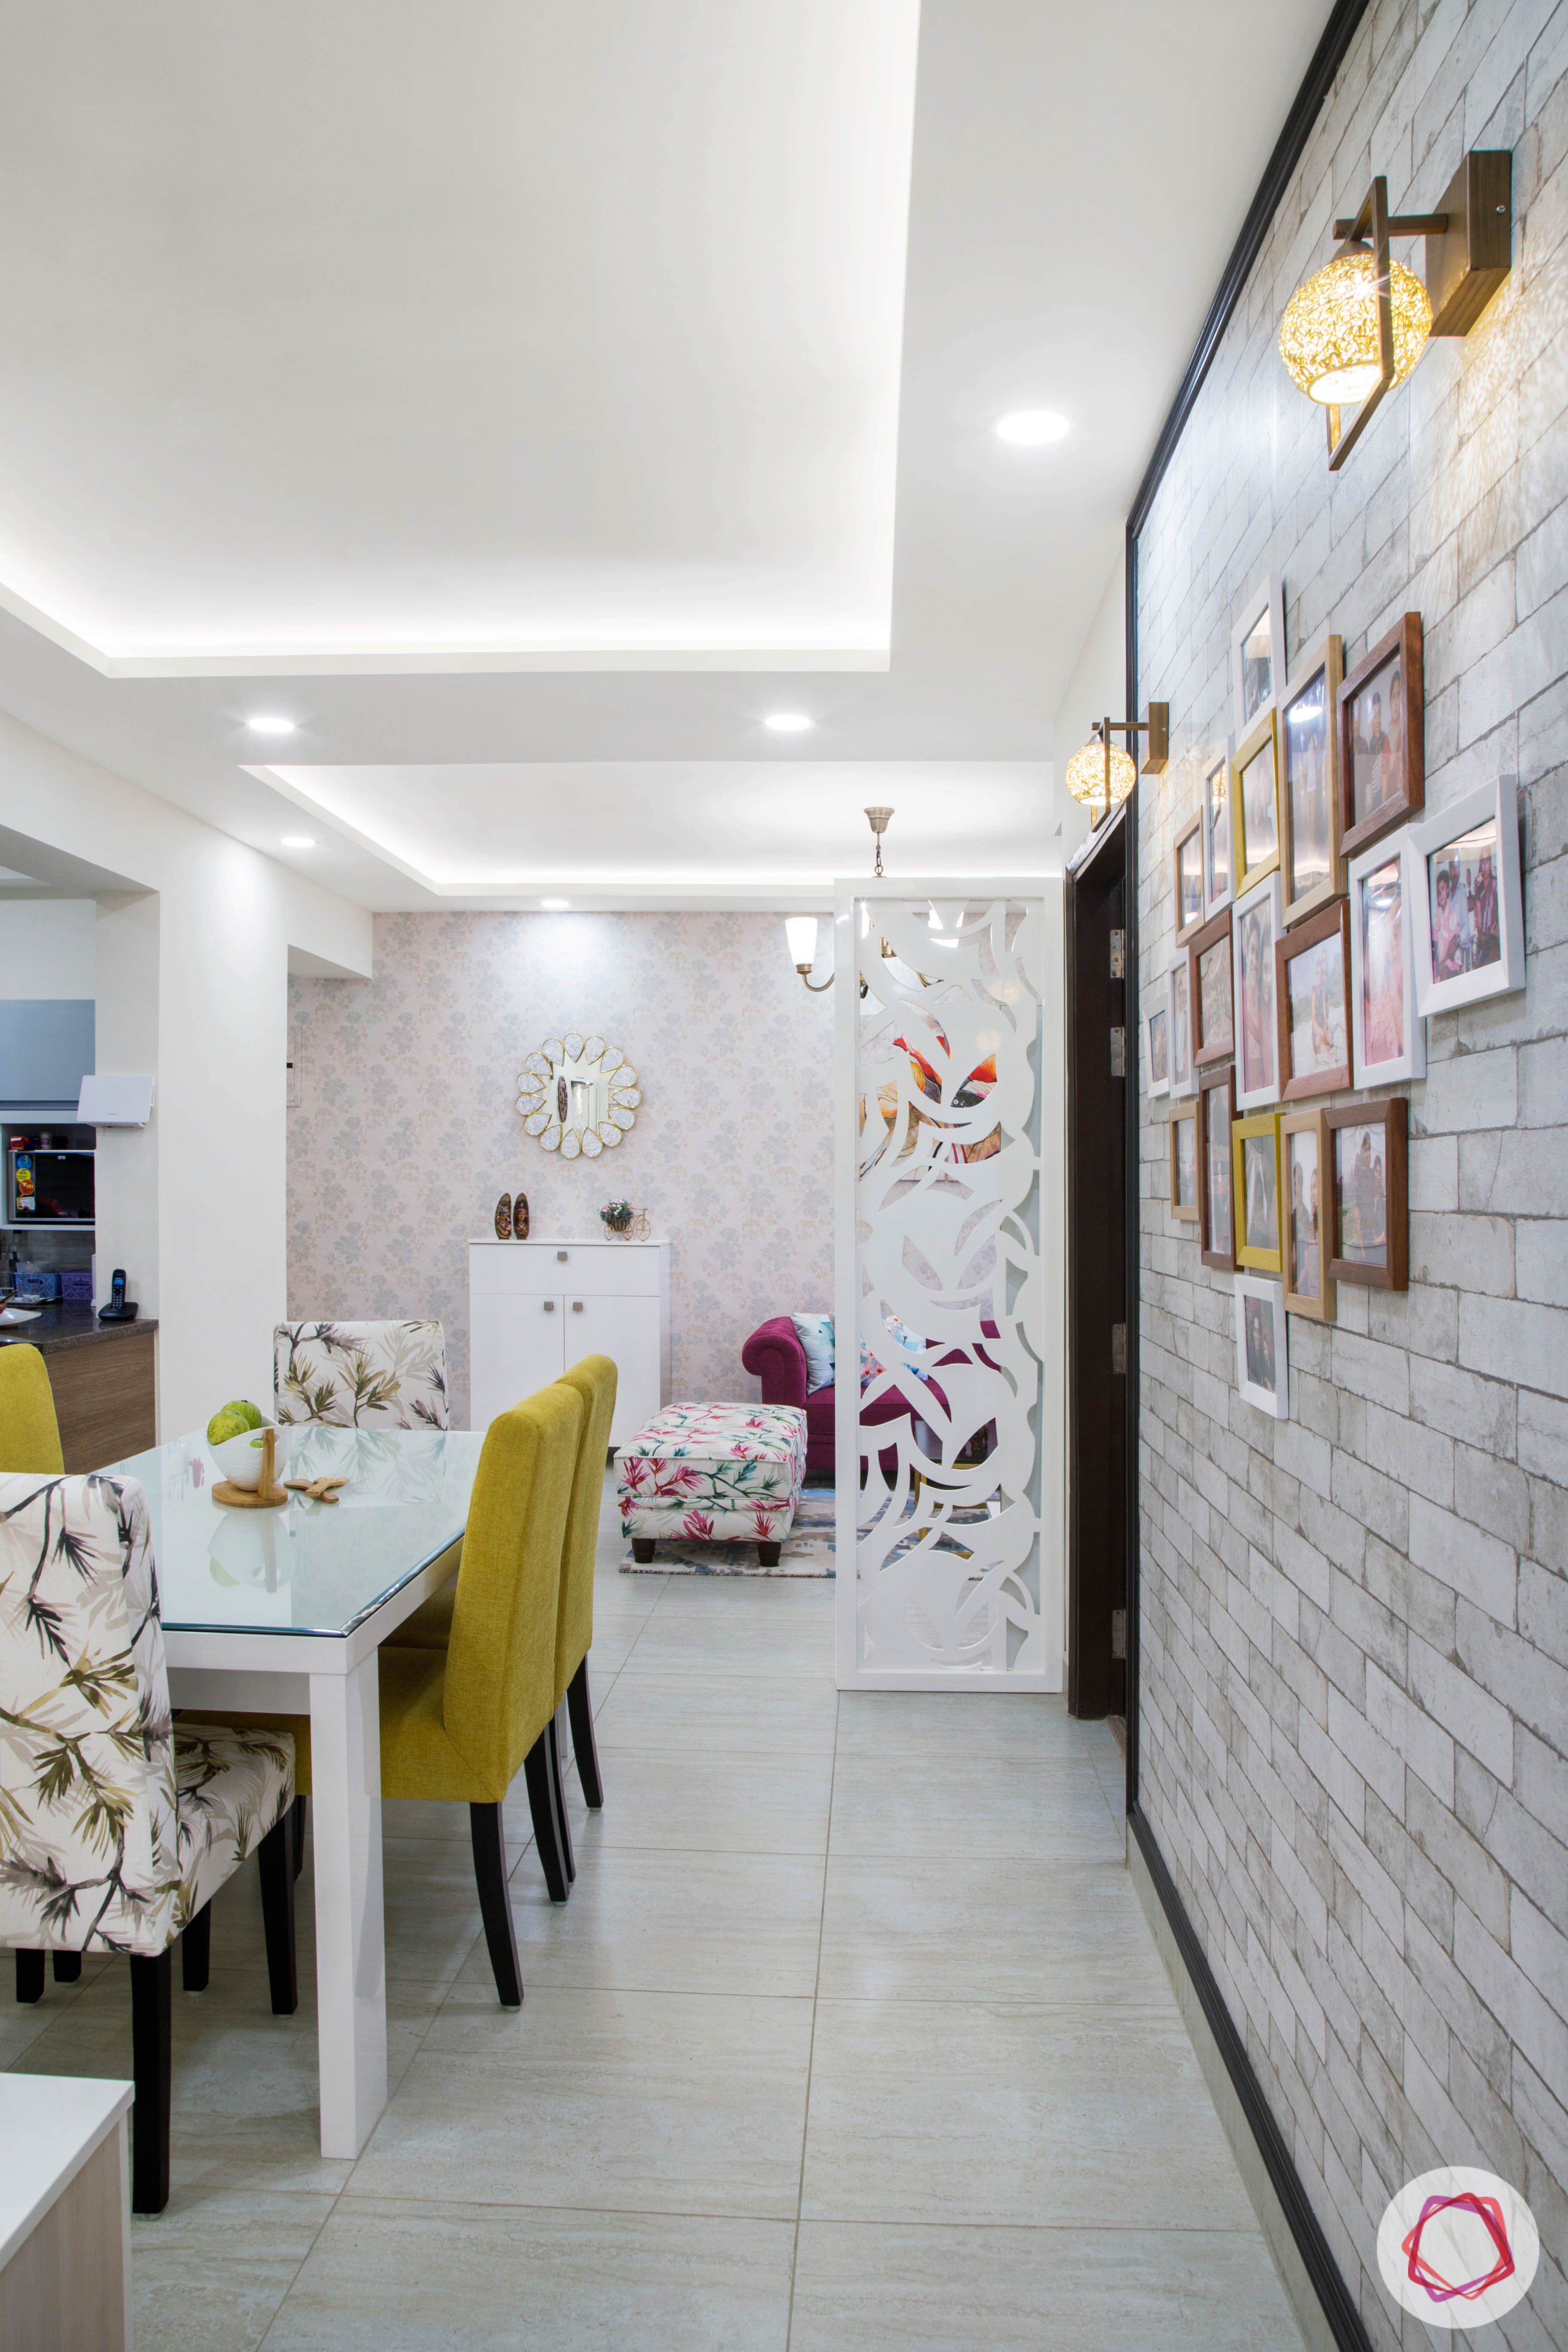 Cleo county noida_dining room with photo wall on exposed brick wallpaper